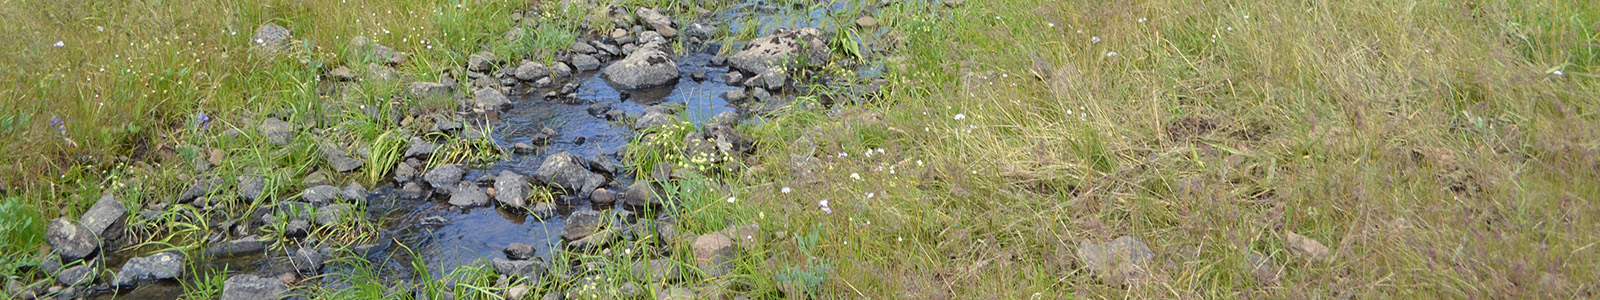 Small creek surrounded by native grasses.